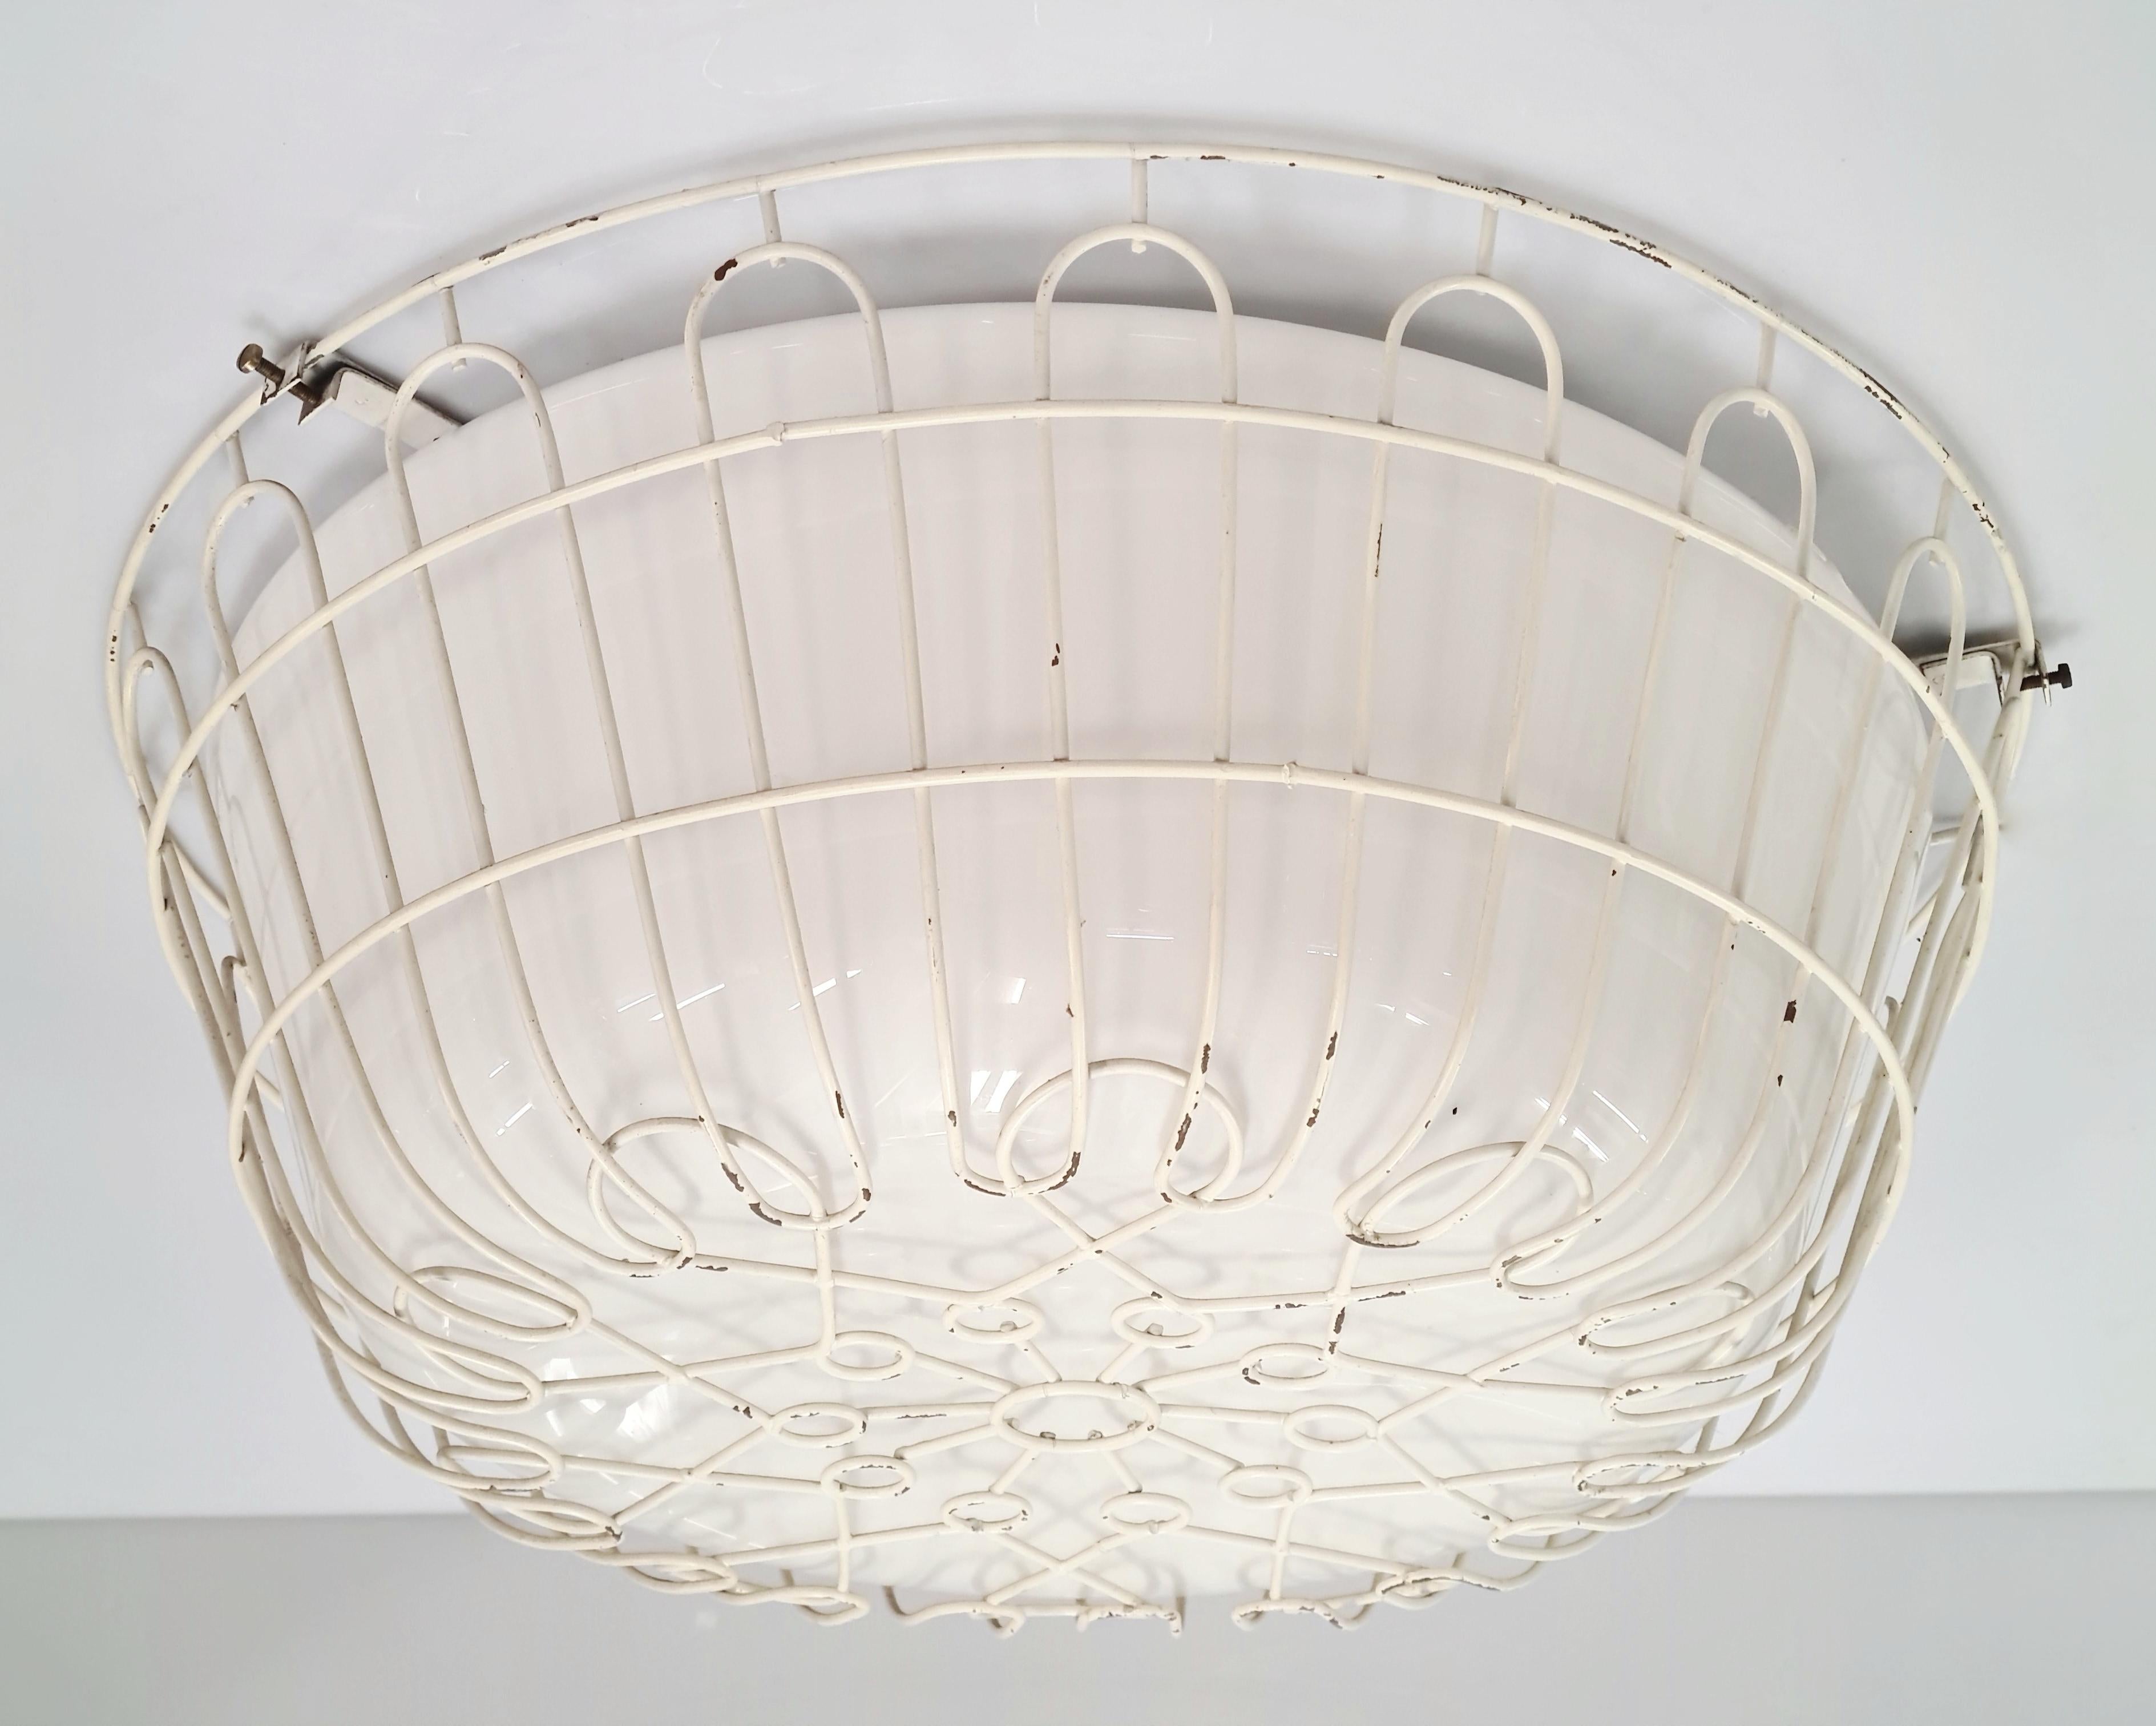 A Beautiful and Lively Lisa Johansson-Papé Ceiling Lamp Model 71-115, Orno 1950s For Sale 6